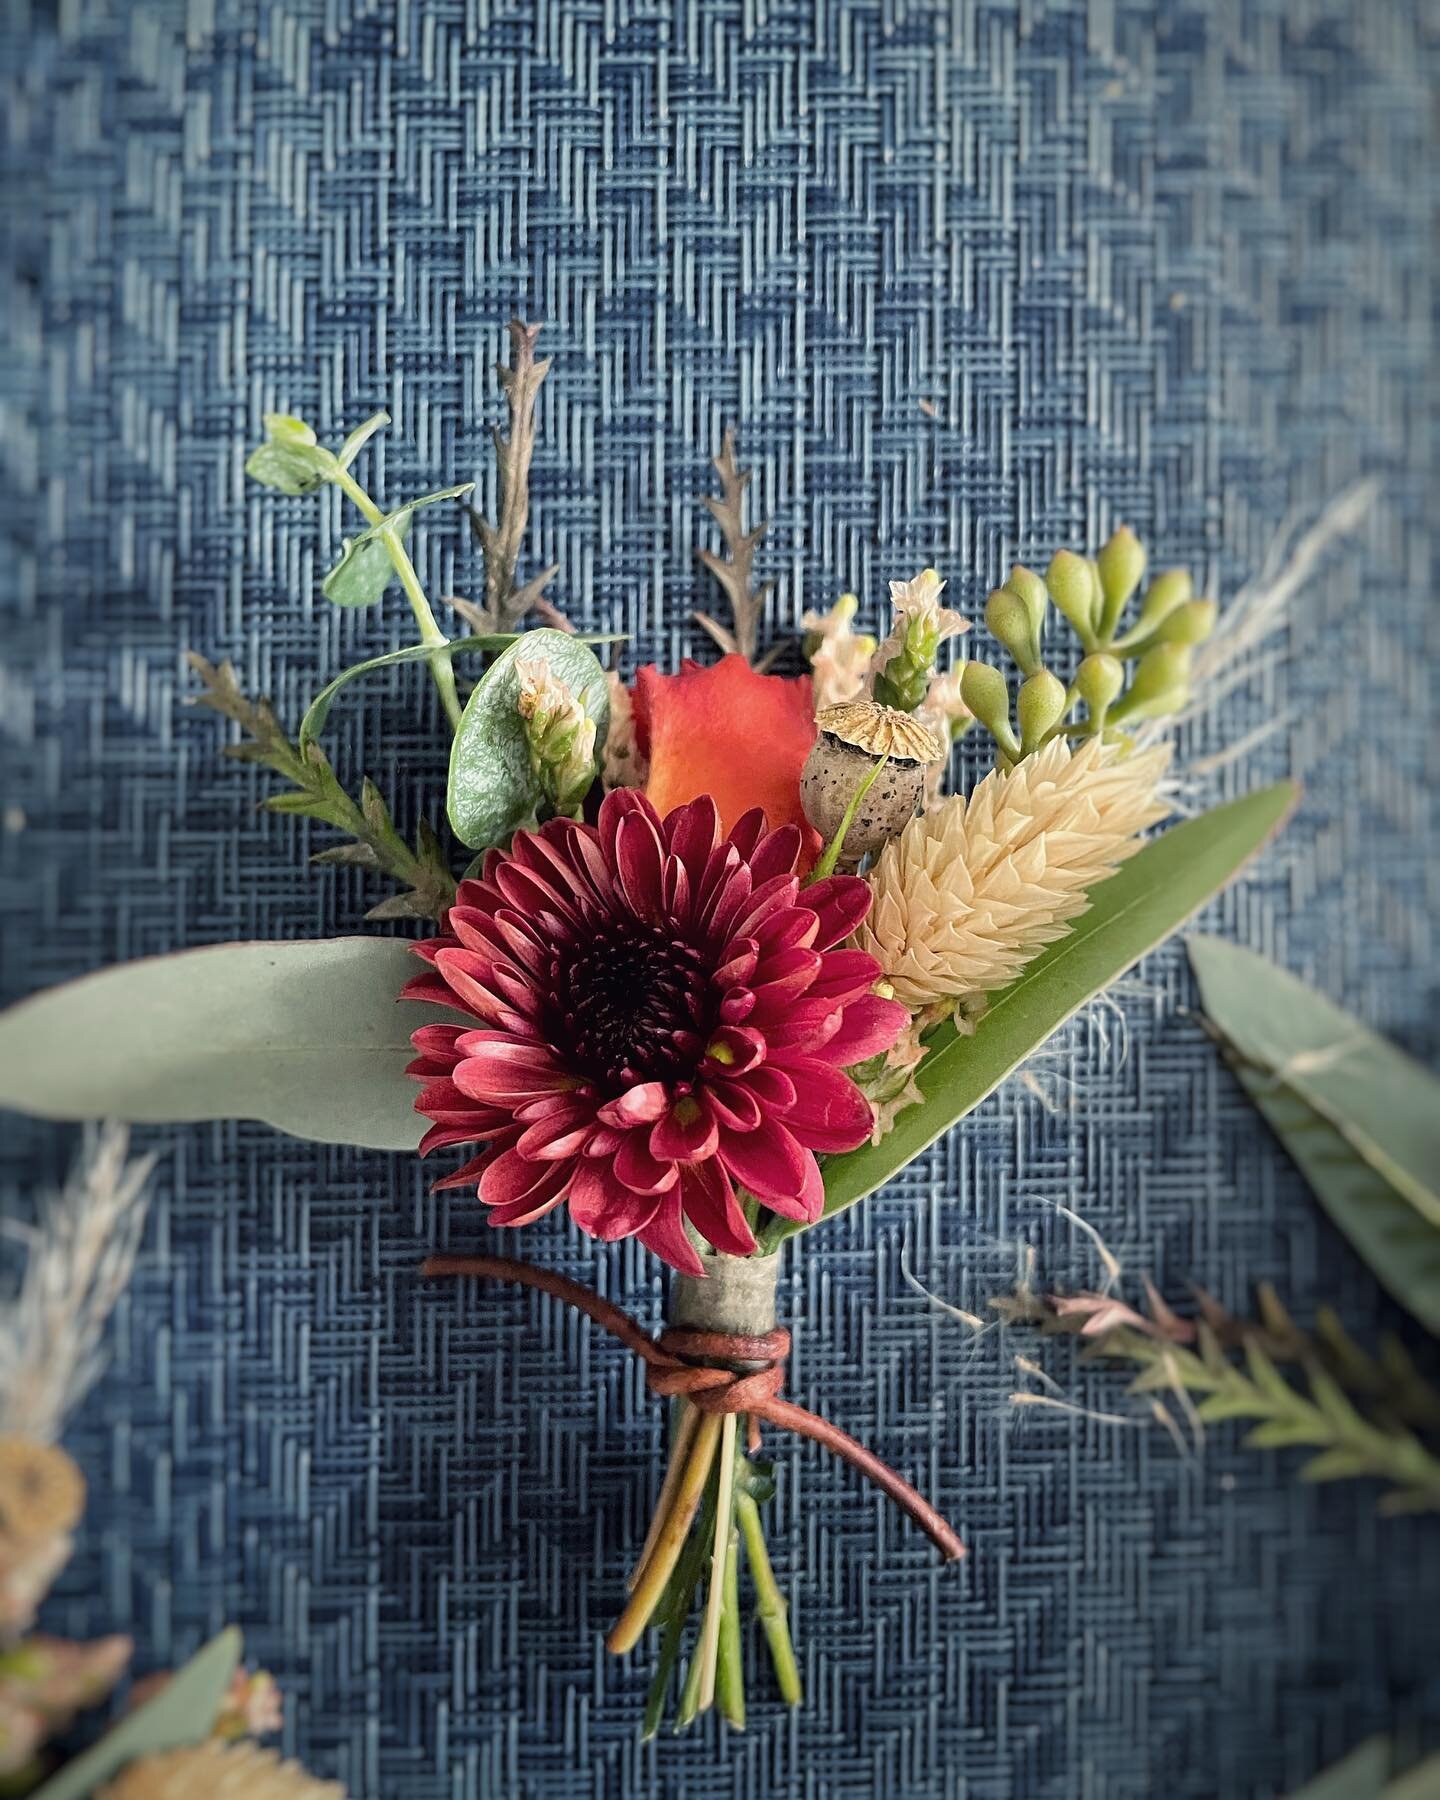 Wishing everyone a happy Thanksgiving 🦃 here is a cute bout and bouquet from last weekend&rsquo;s wedding bringing the harvest season vibes 🌾